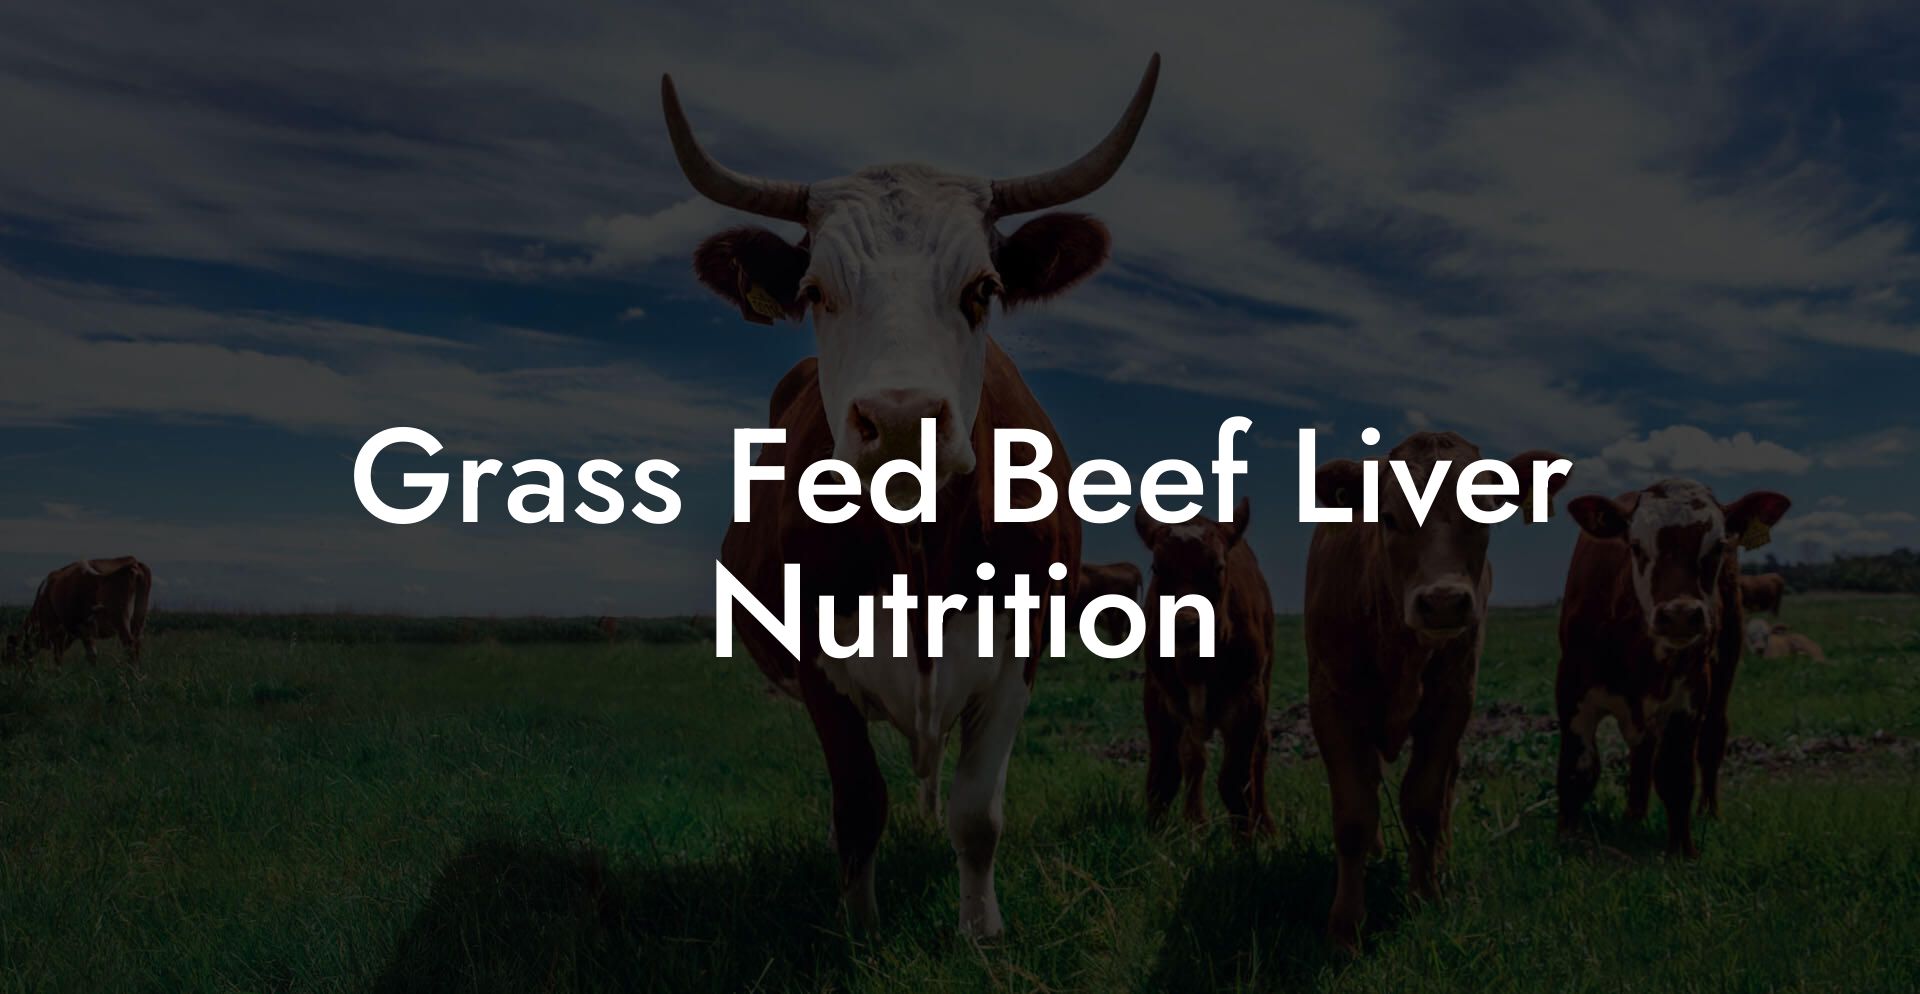 Grass Fed Beef Liver Nutrition